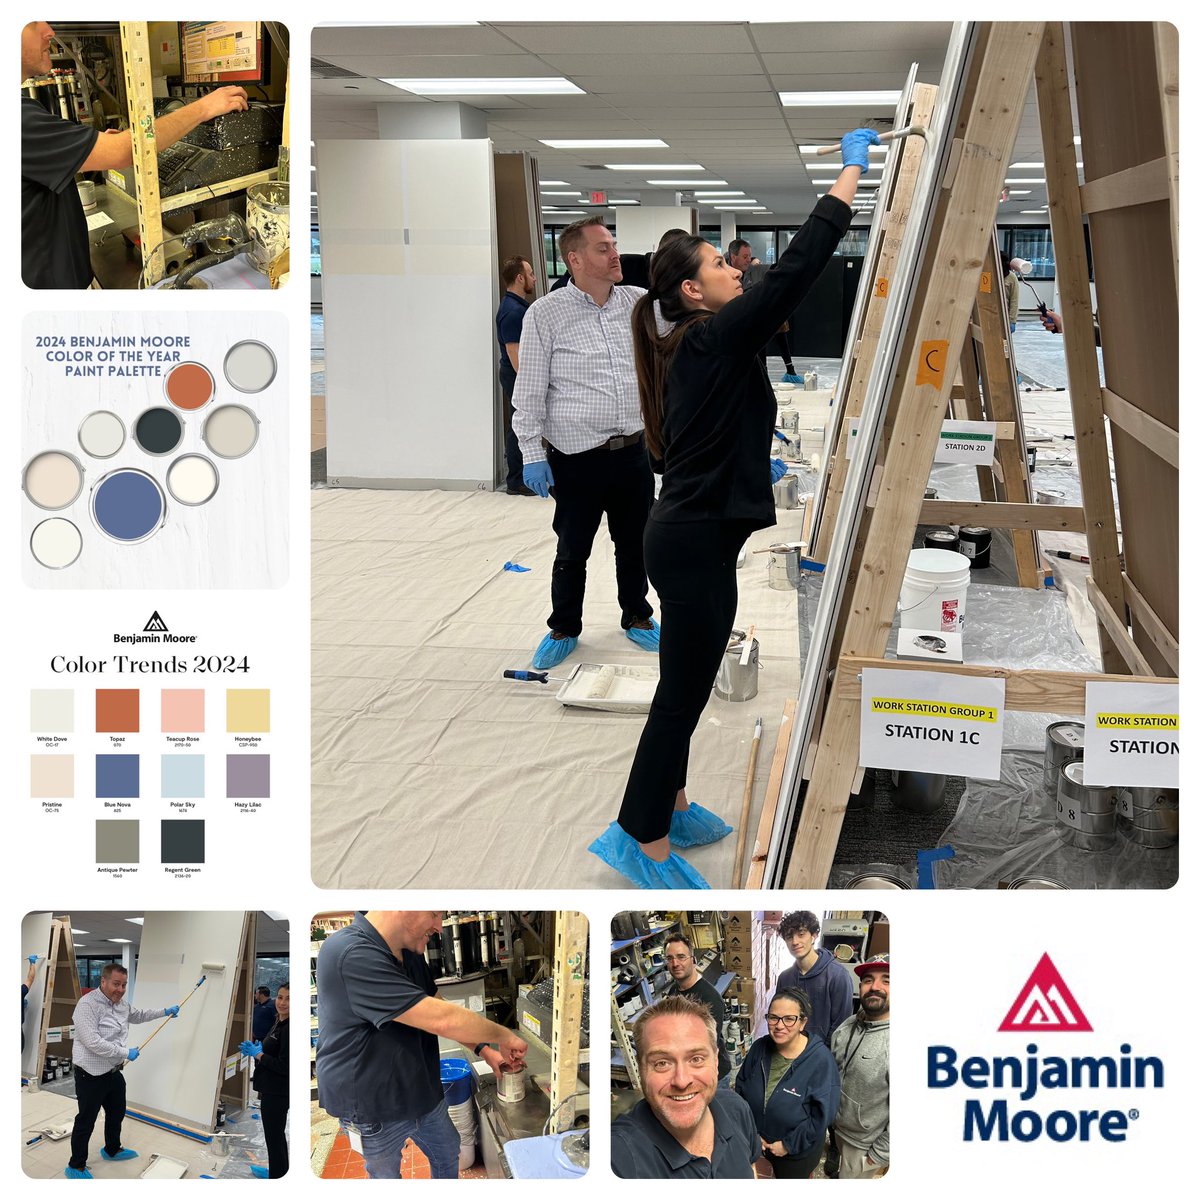 Jumping into a new chapter with #benjaminmoore 🌈 Adapting my learning skills to the art of paint, understanding the spectrum of products, and brushing up on customer connections. Leading the way to innovative training that's as precise as a painter's touch! #careermove